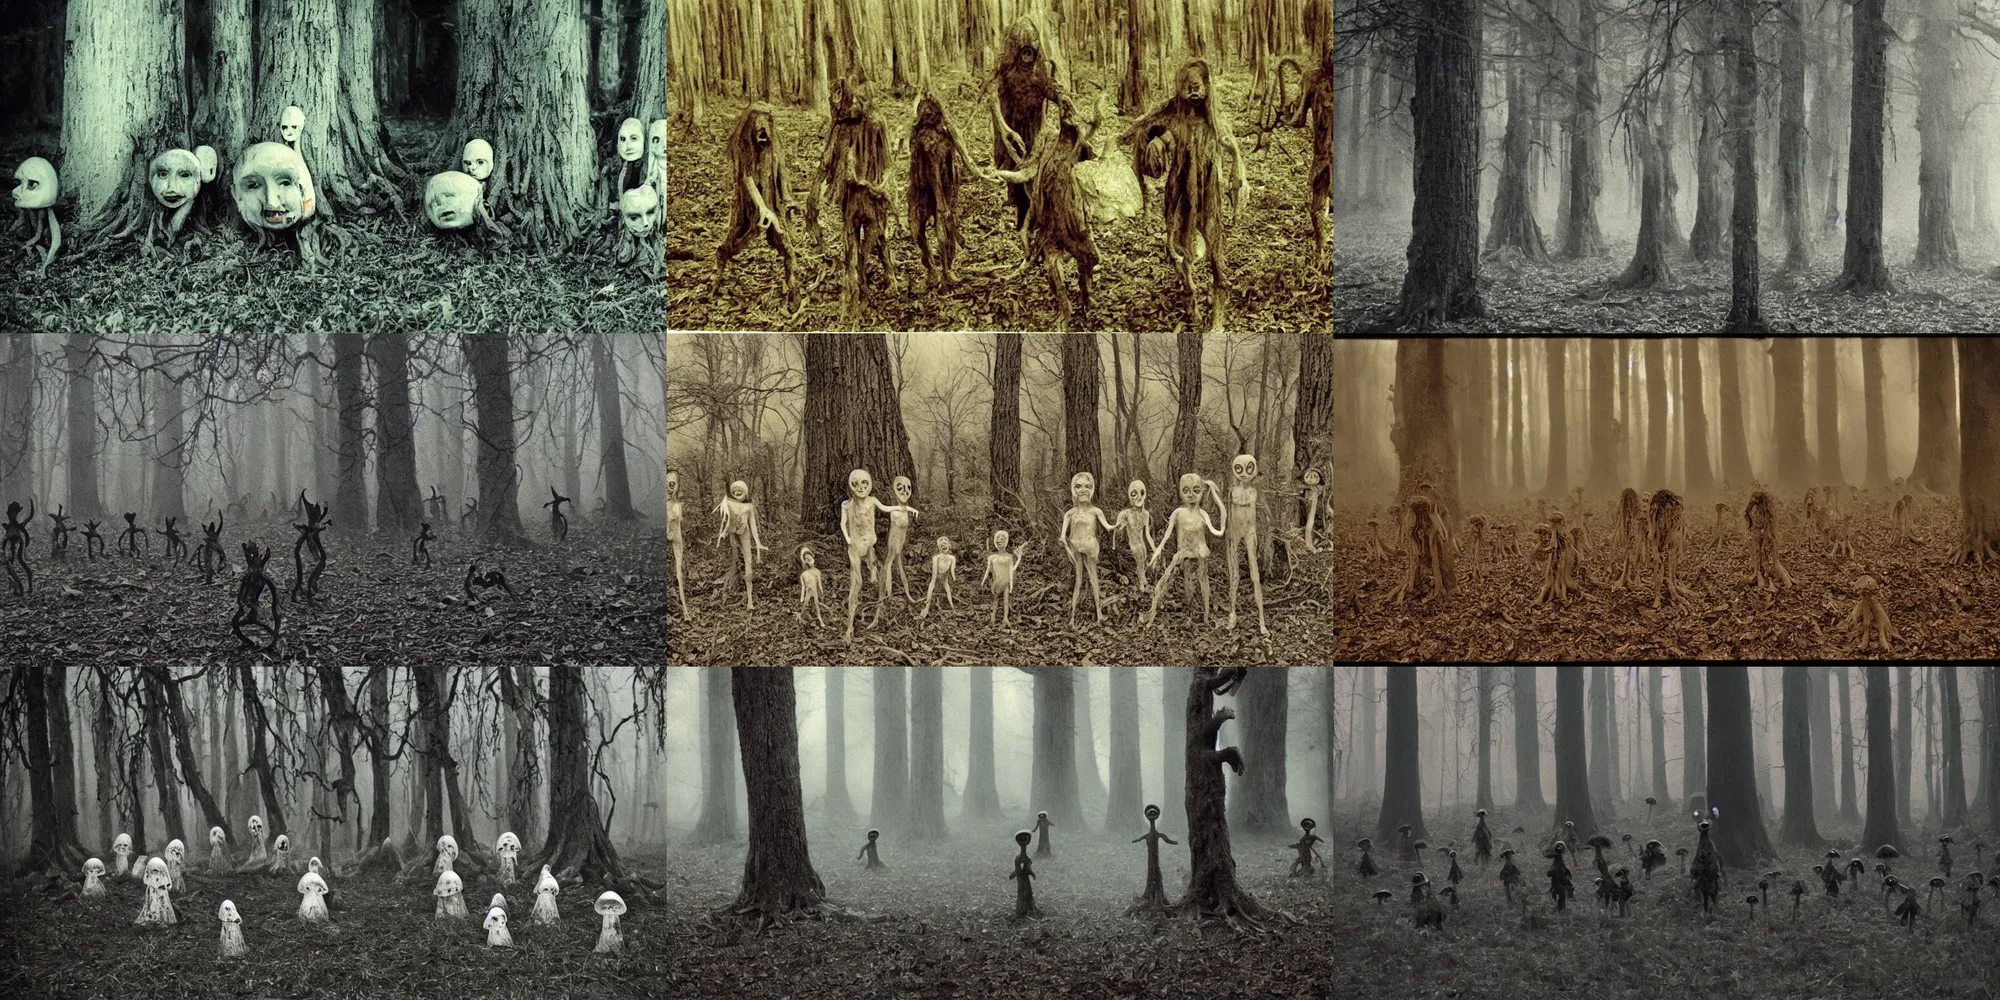 Prompt: mushroom demonic children, terrifying tortured tree monsters with distorted pained faces made of bark, lovecraftian eldritch horror, pans labyrinth, liminal, nightmare inducing, unsettling found footage, haunted, low quality grainy, foggy, bokehlicious, shot on expired kodak film, historical photograph